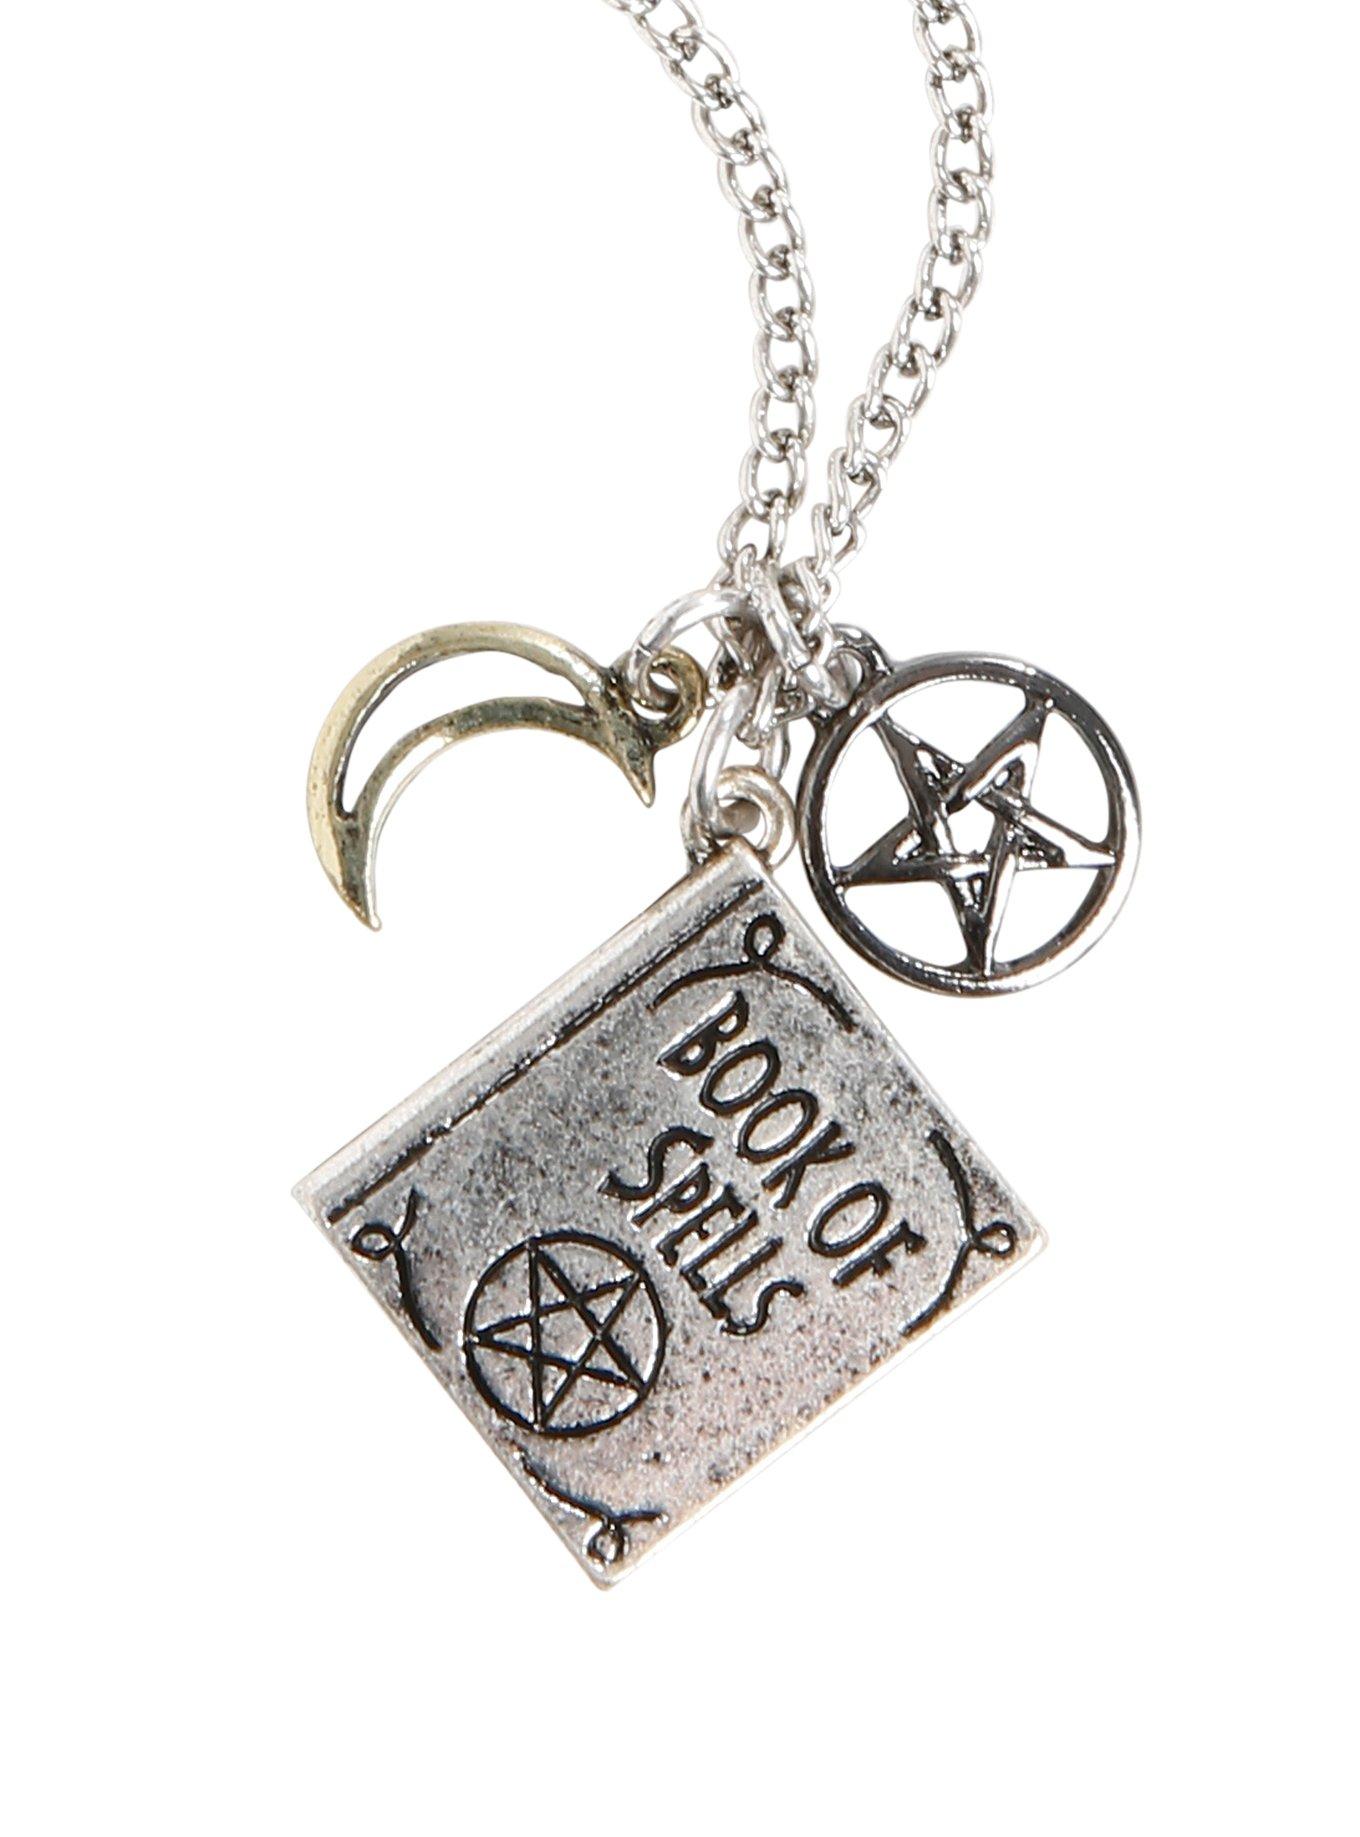 Book Of Spells Charm Necklace, , hi-res